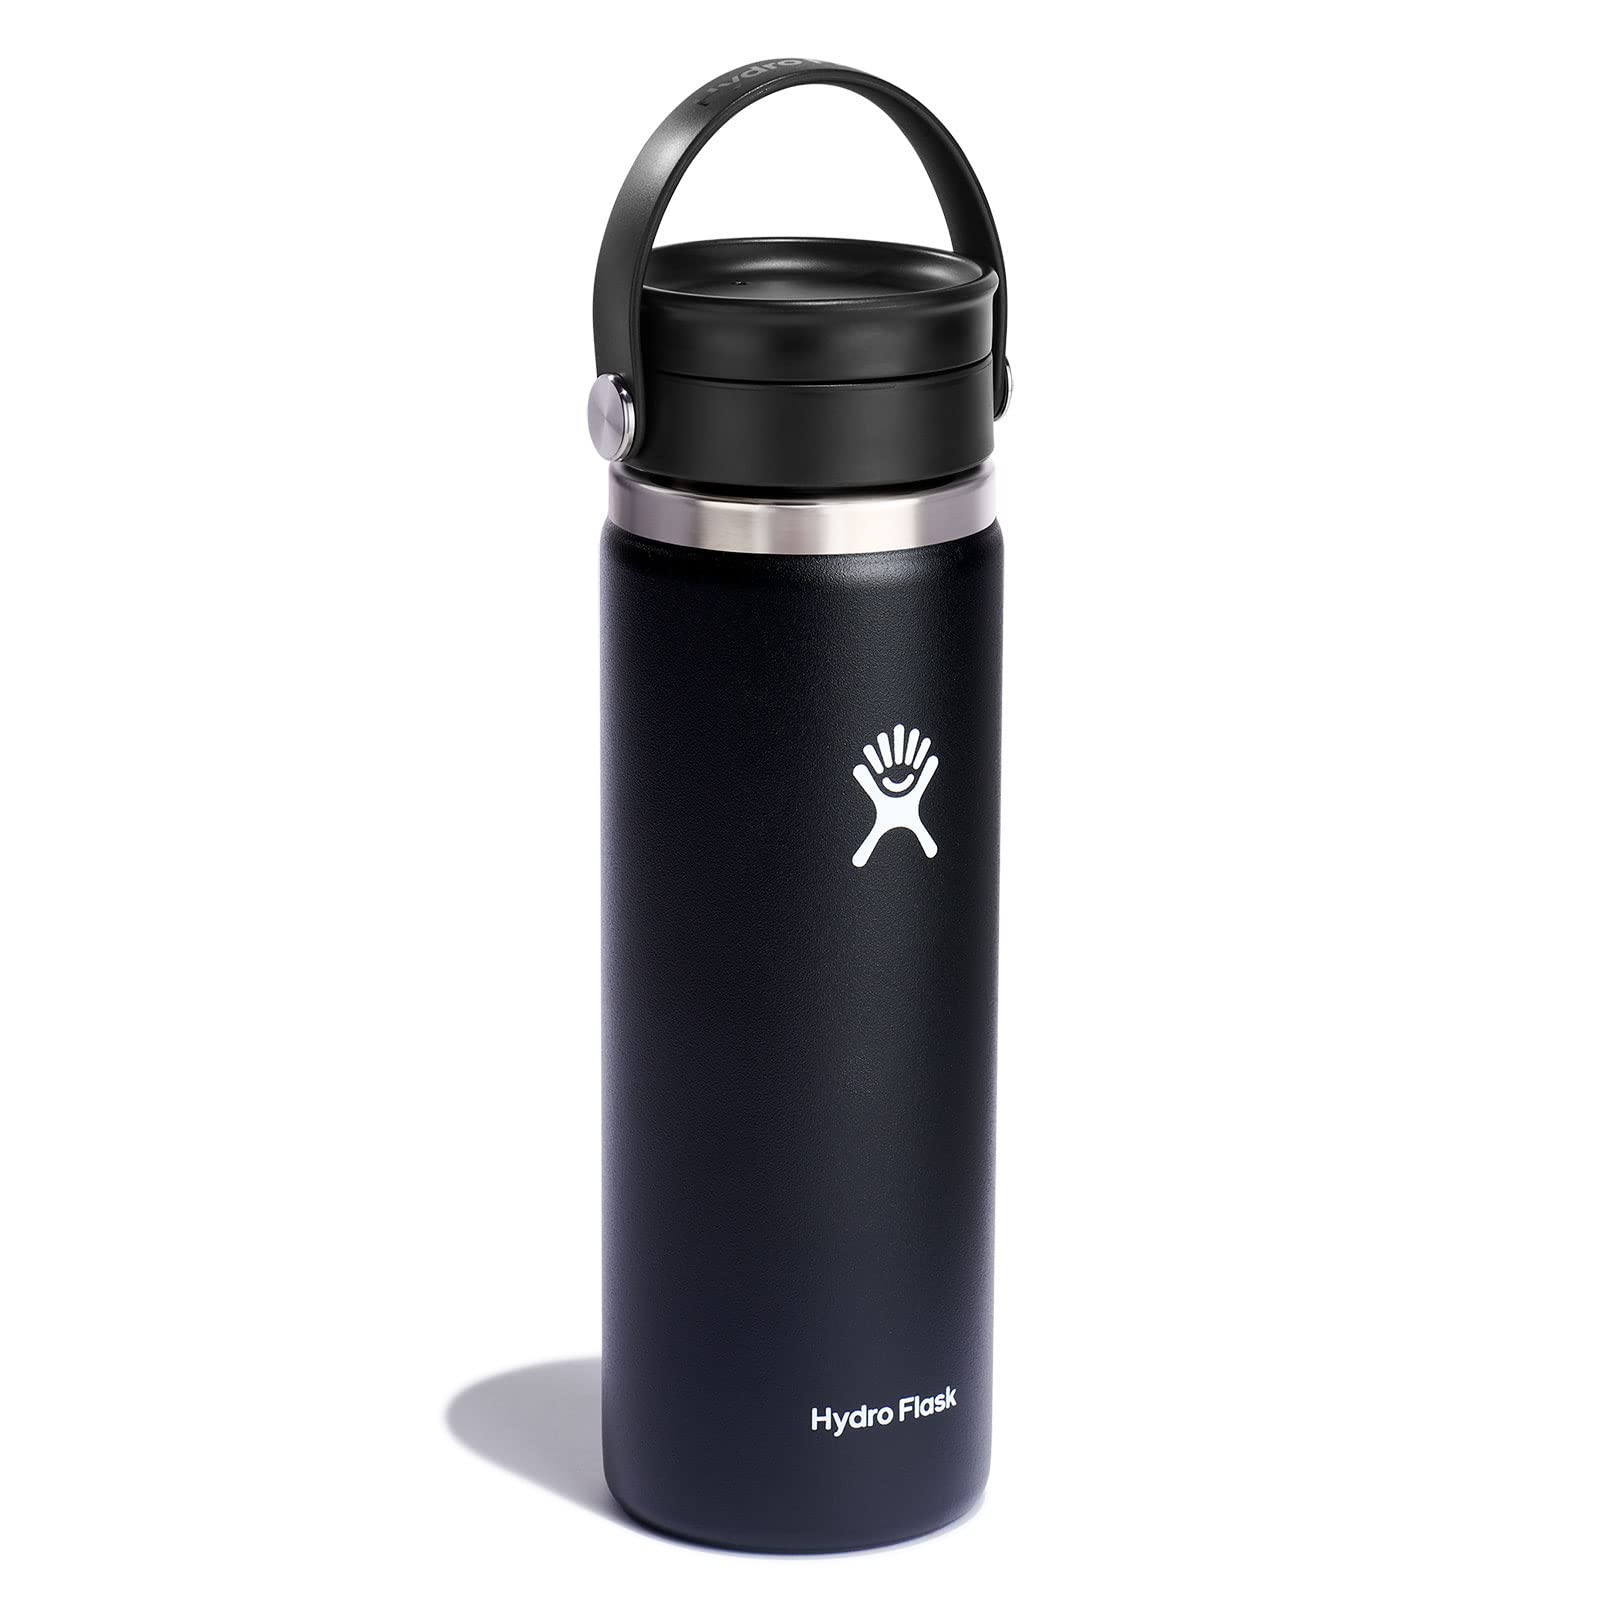 20-Oz Hydro Flask Wide Mouth Insulated Water Bottle w/ Flex Sip Lid (Black) $16.96 + Free Shipping w/ Prime or on orders $35+